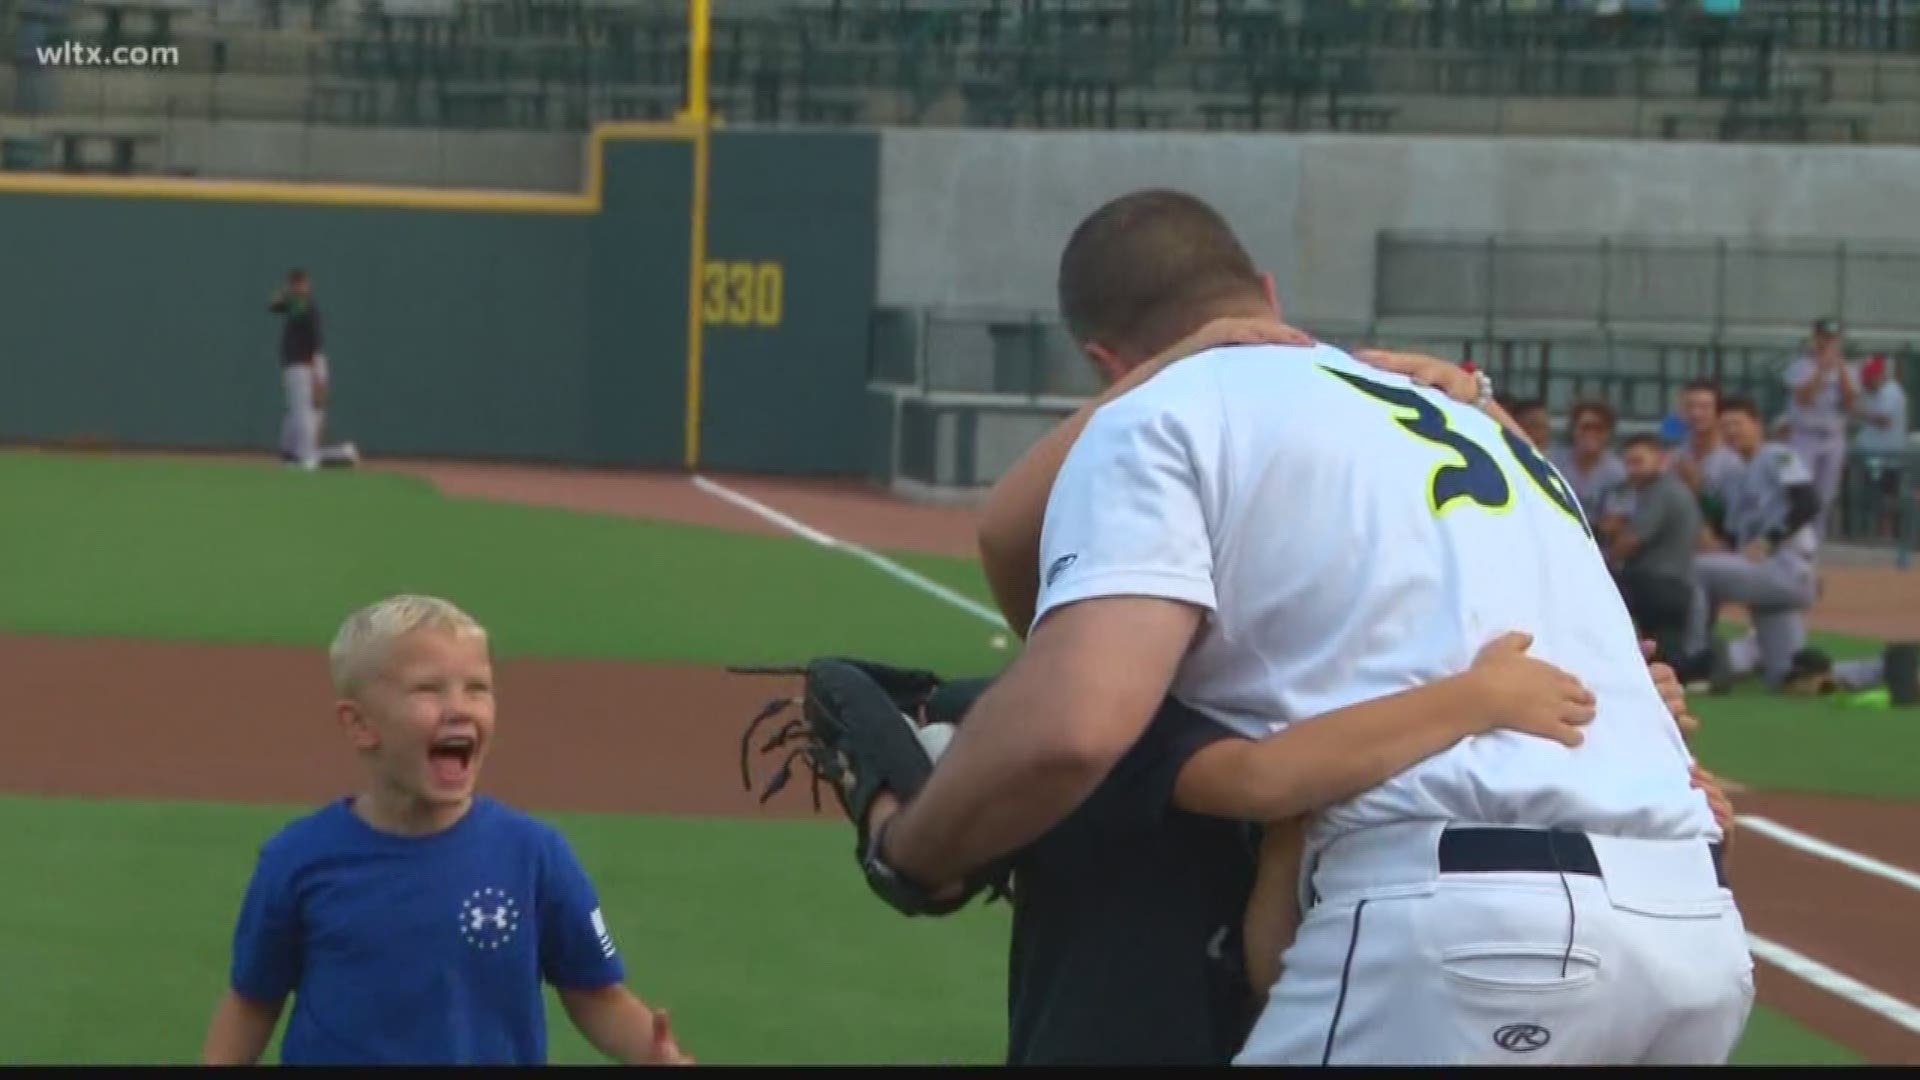 A Midlands family is reunited after a surprise start to Thursday night's Columbia Fireflies game.